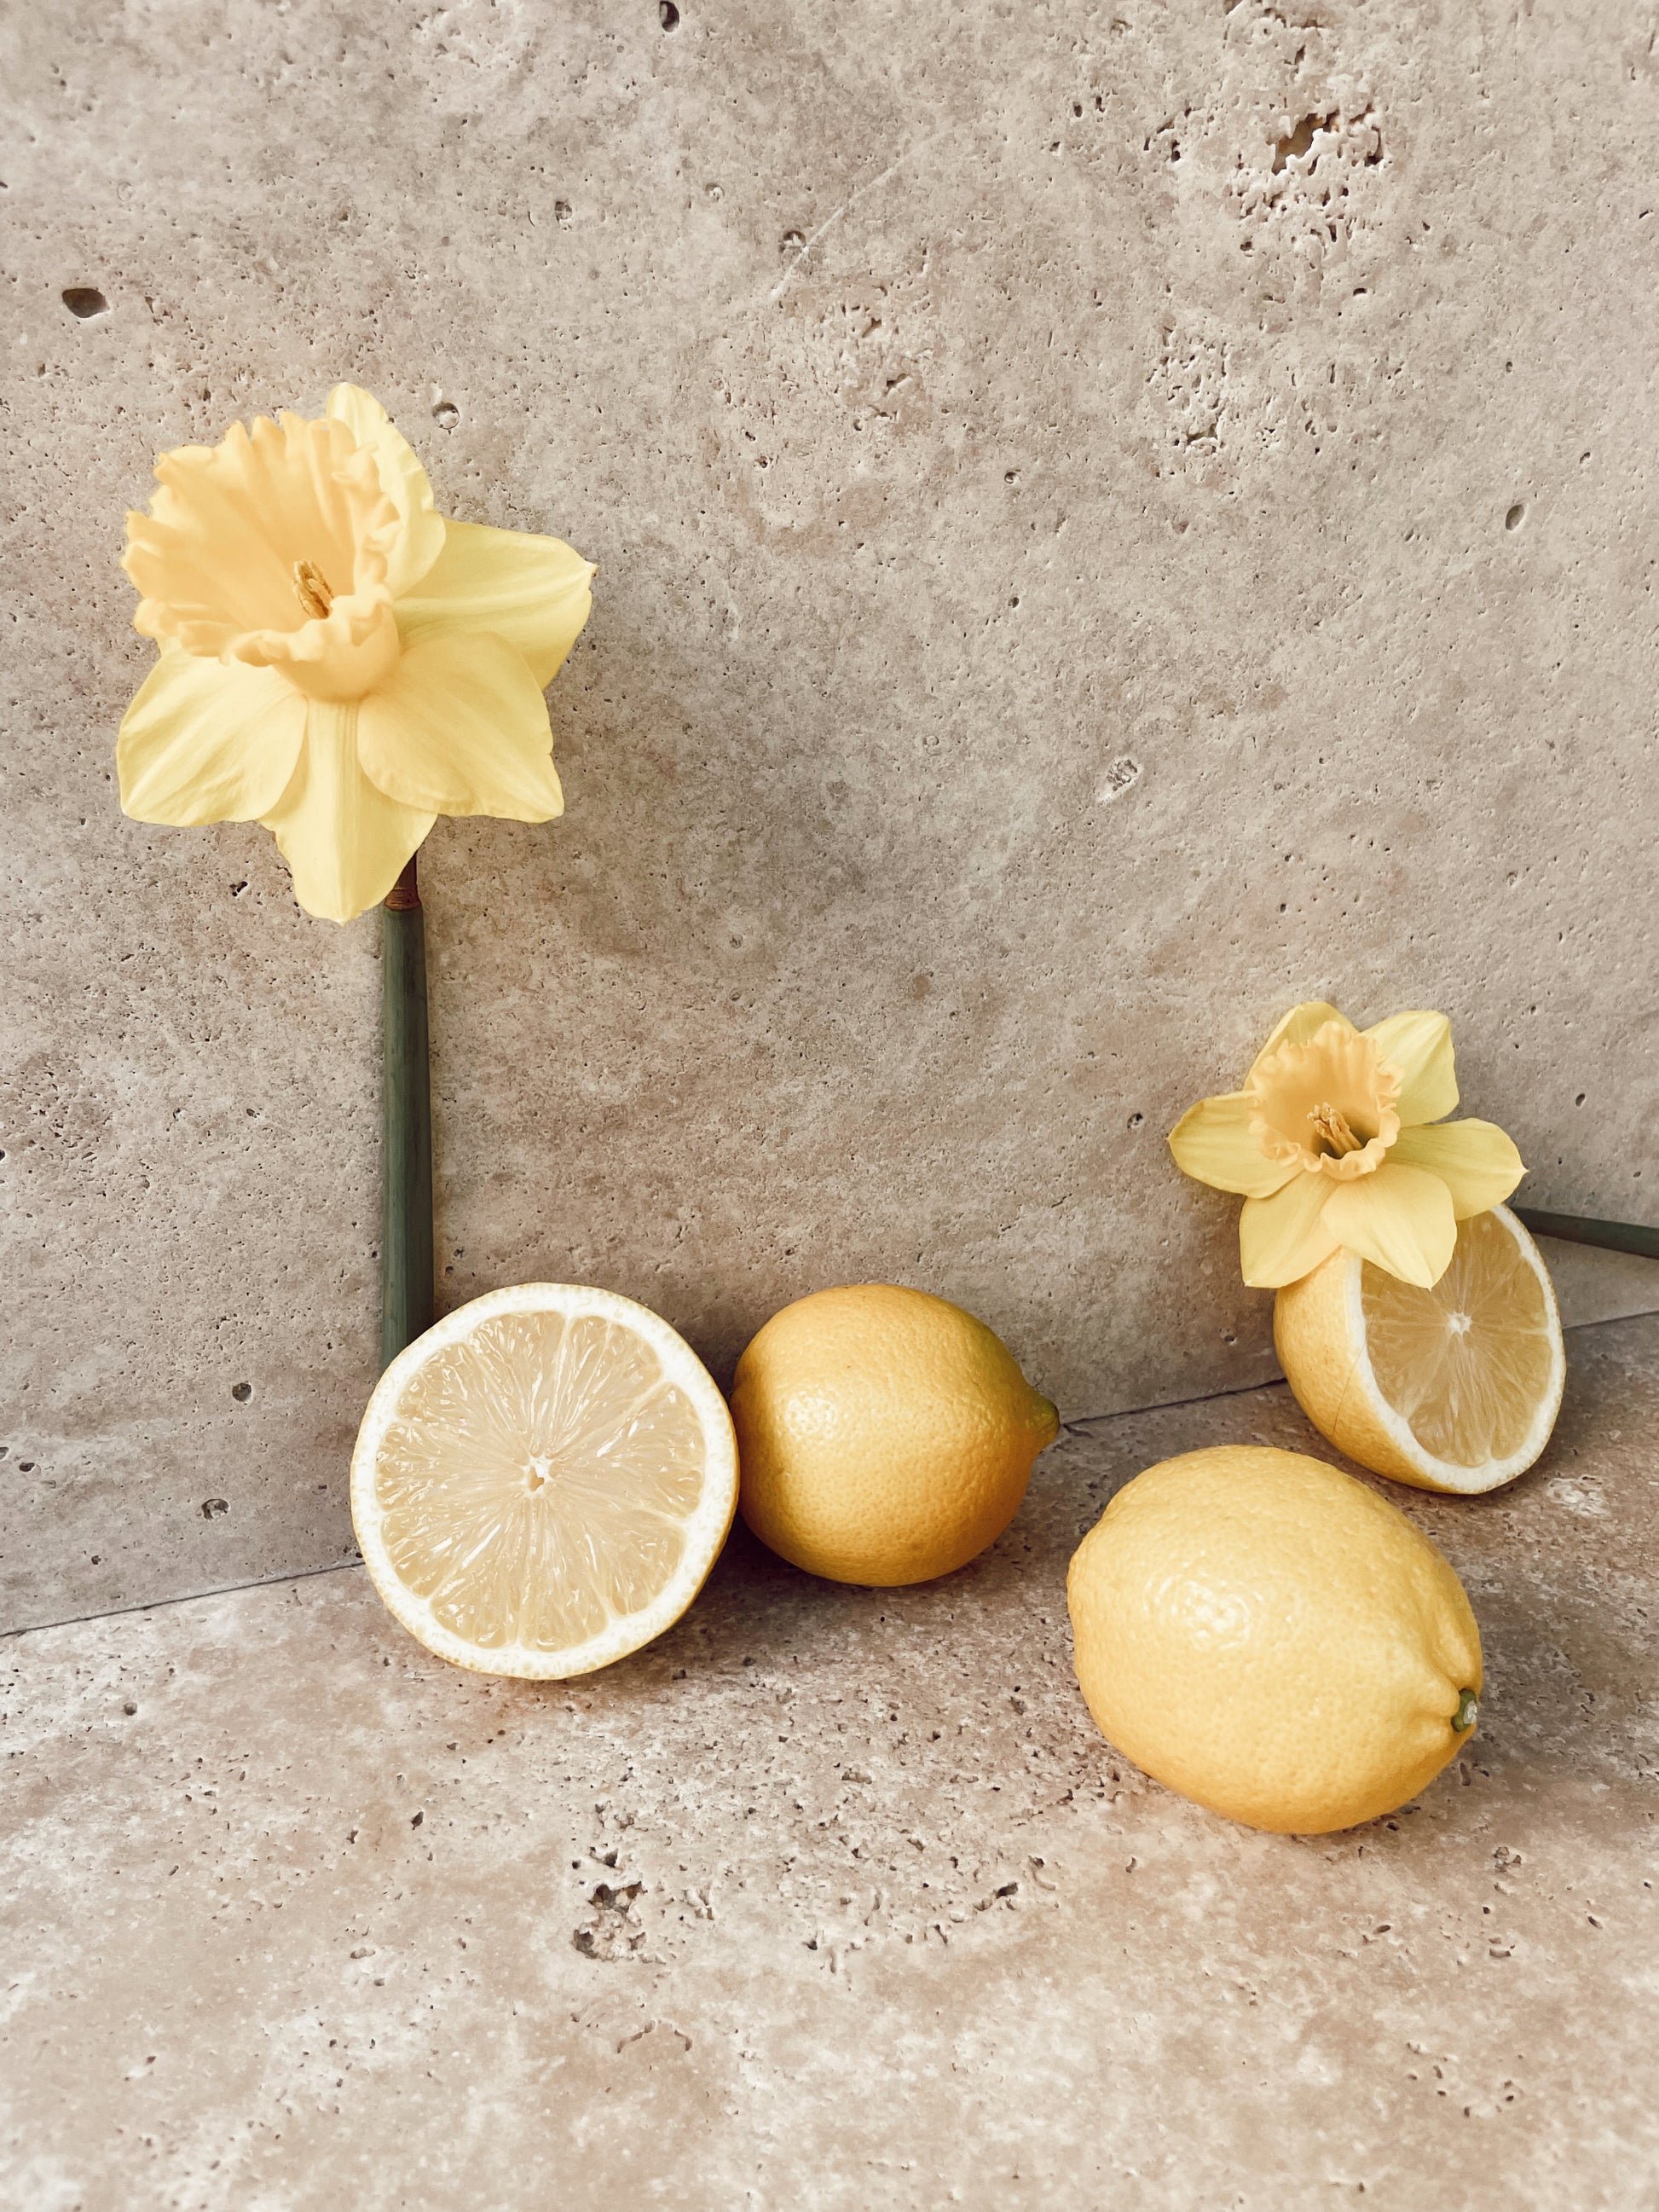 Self Bloom Co Gift Card image contains daffodils and lemons